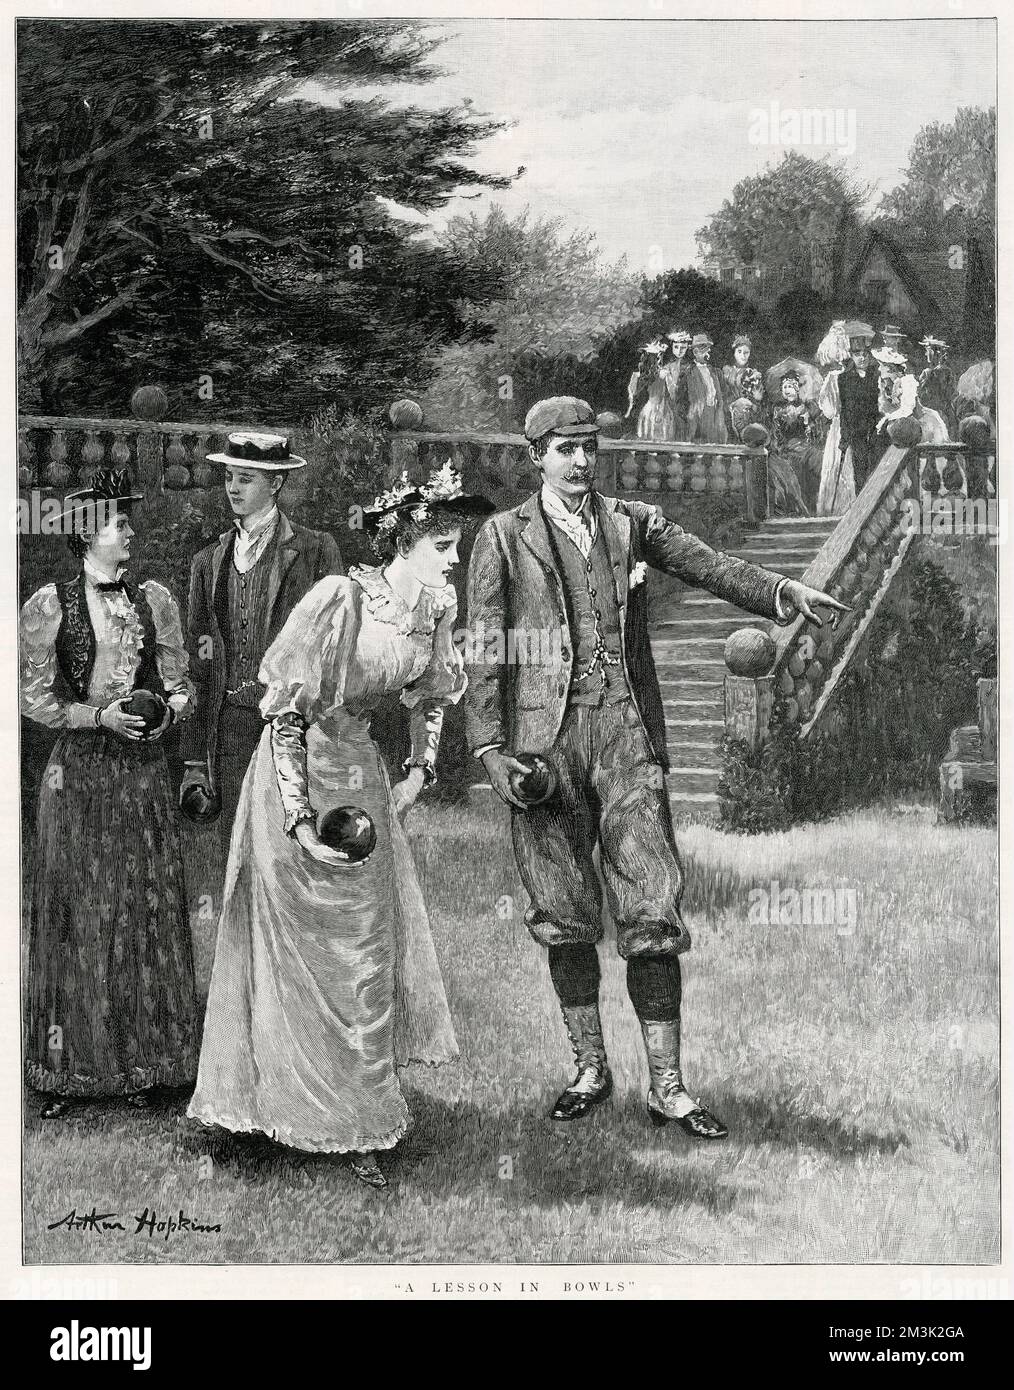 Two young couples enjoying a game of bowls on the lawn of an English country house. Stock Photo